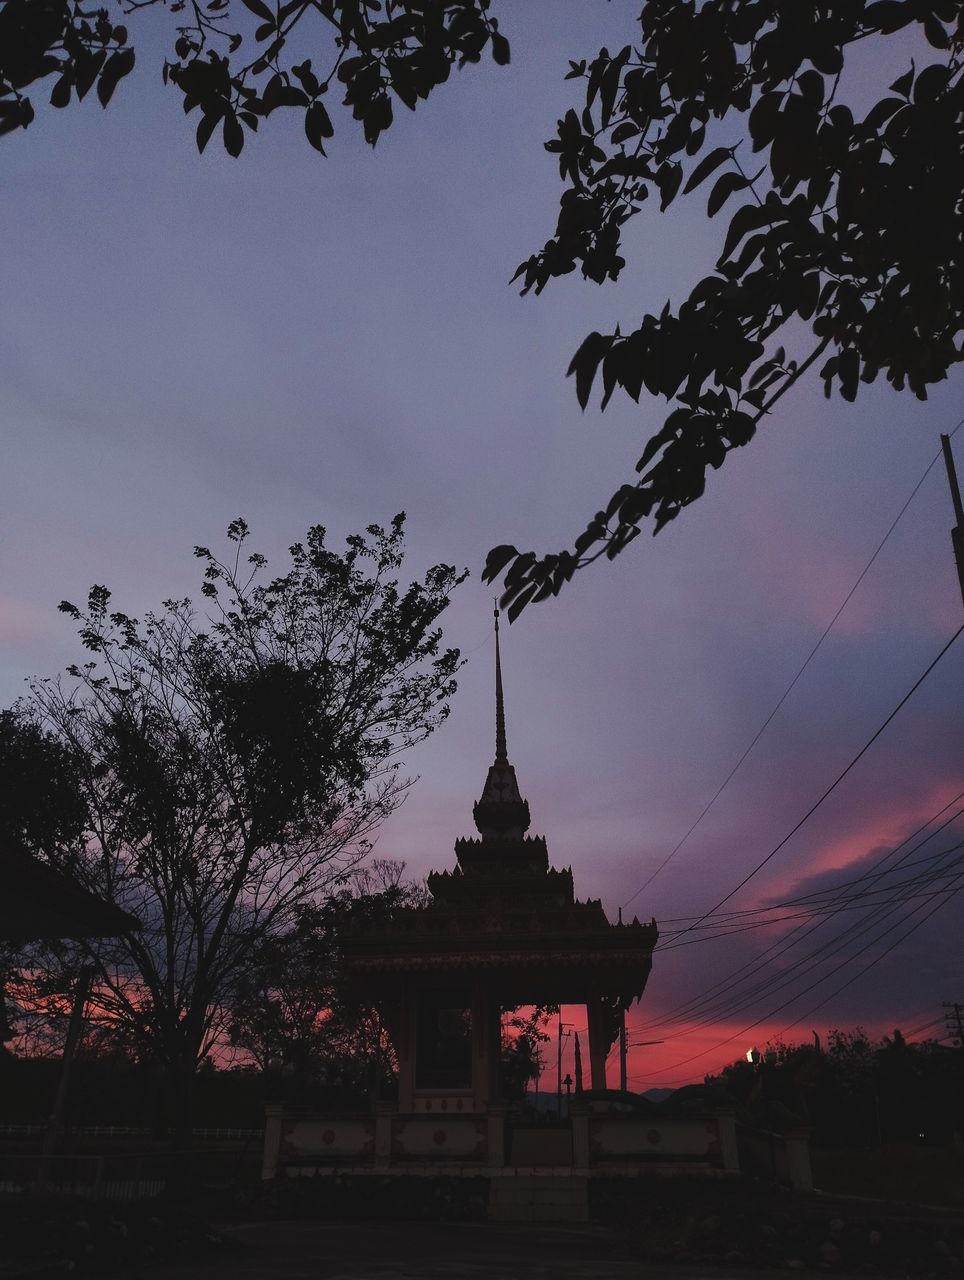 architecture, sky, built structure, tree, evening, dusk, temple - building, sunset, religion, plant, nature, building exterior, belief, travel destinations, silhouette, building, history, place of worship, cloud, the past, no people, darkness, spirituality, pagoda, travel, tradition, outdoors, city, tourism, ancient, beauty in nature, night